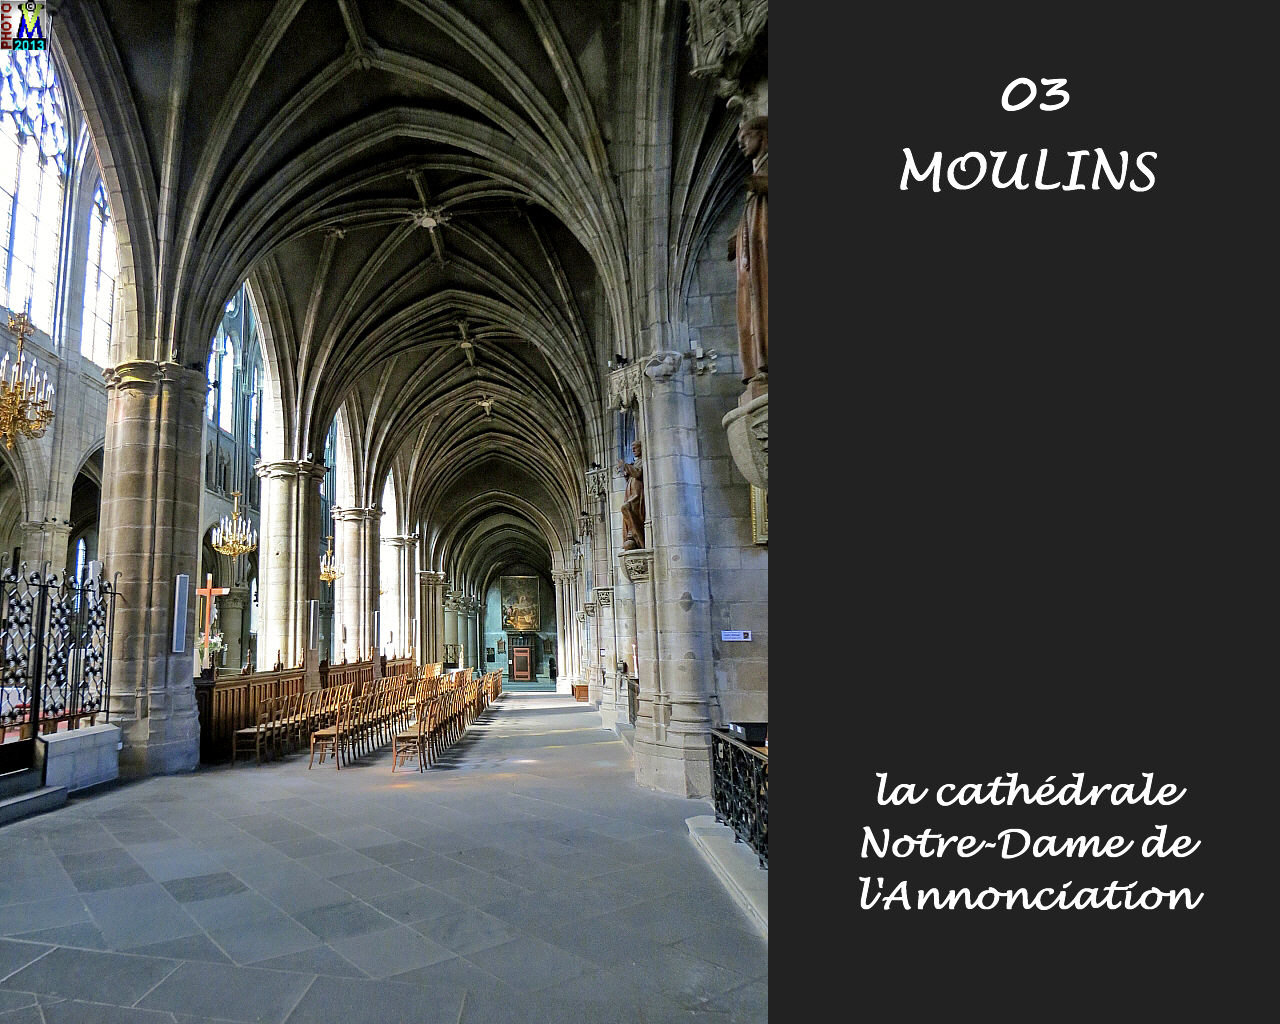 03MOULINS_cathedrale_206.jpg